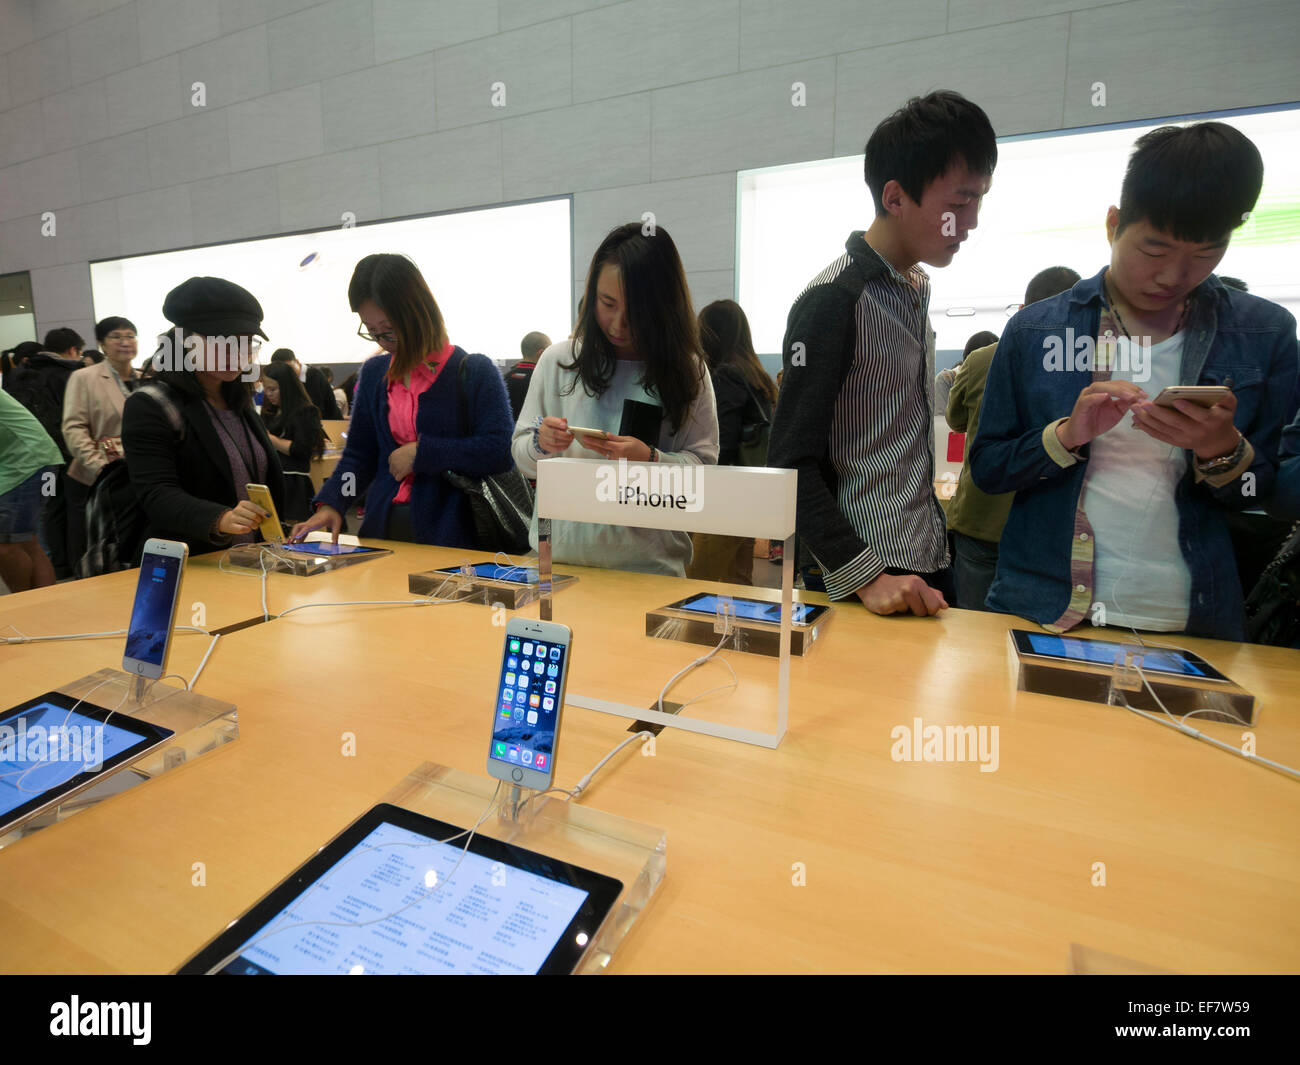 Costumers browsing Apple iPhones at the Apple store located on Nanjing Road in Shanghai, China Stock Photo